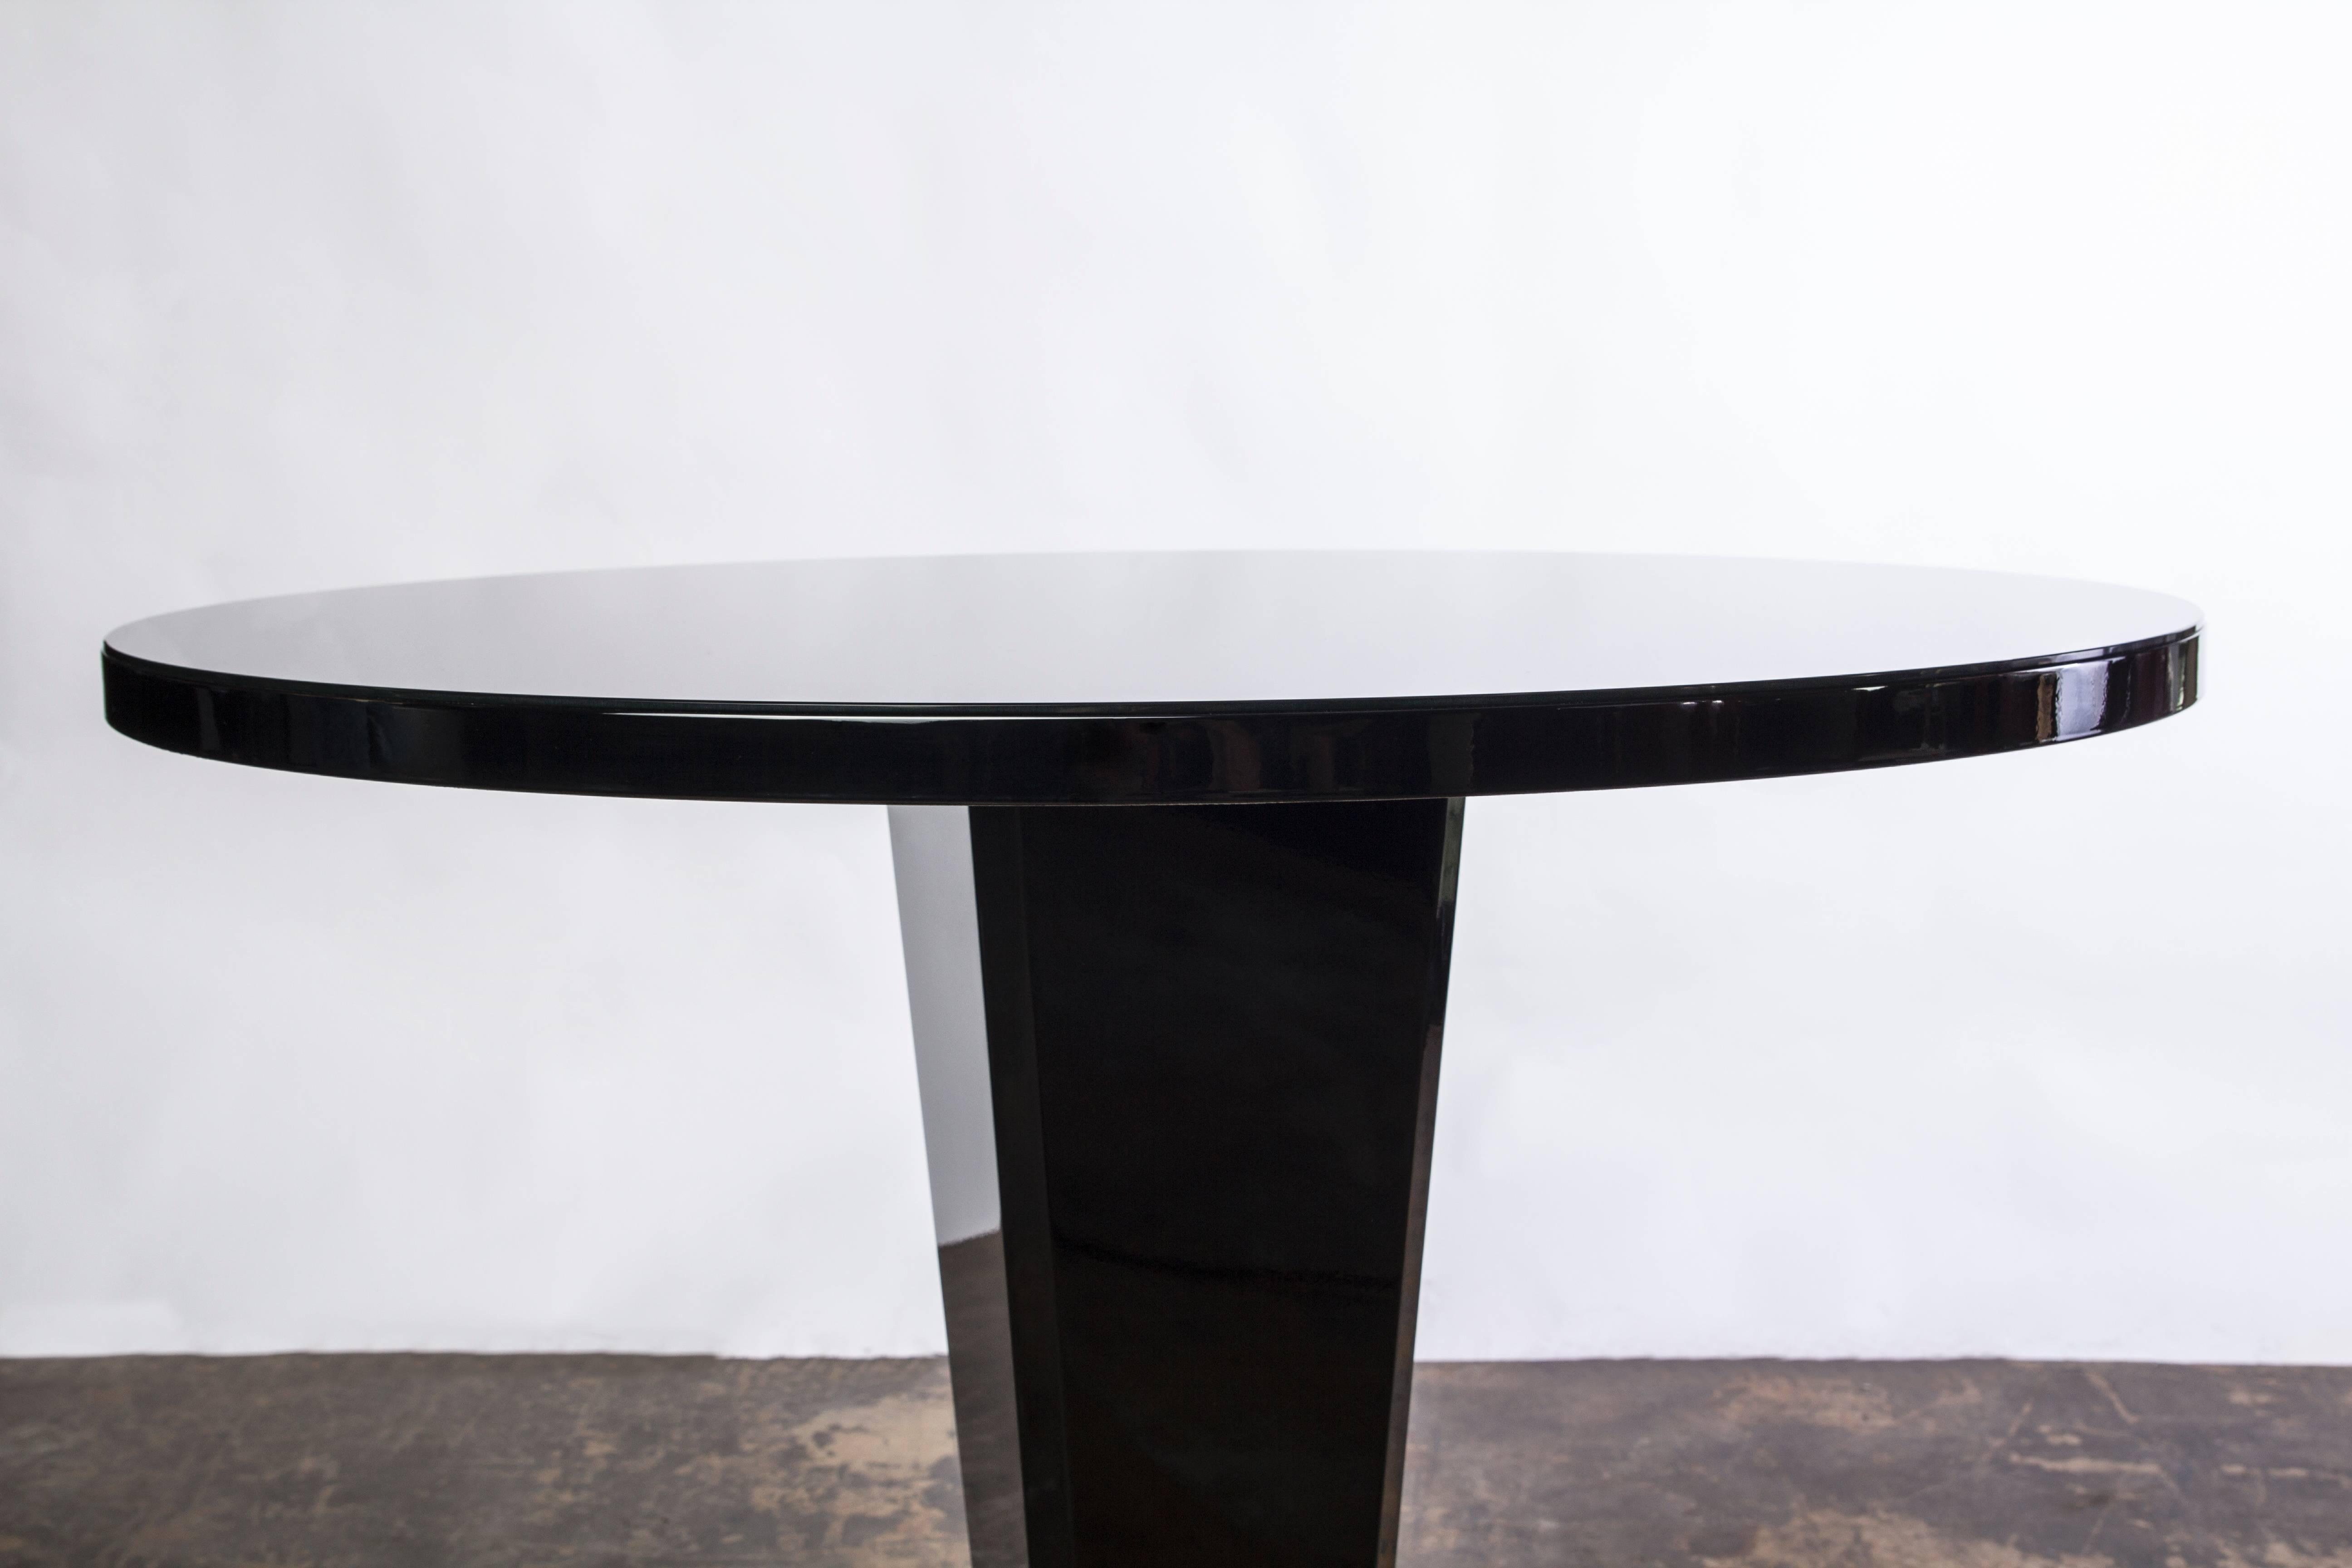 This beautiful round Art Deco table features a gorgeous high gloss black lacquer finish topped with a Lacobel glass top plate.

Made in France, circa: 1935

35 1/2